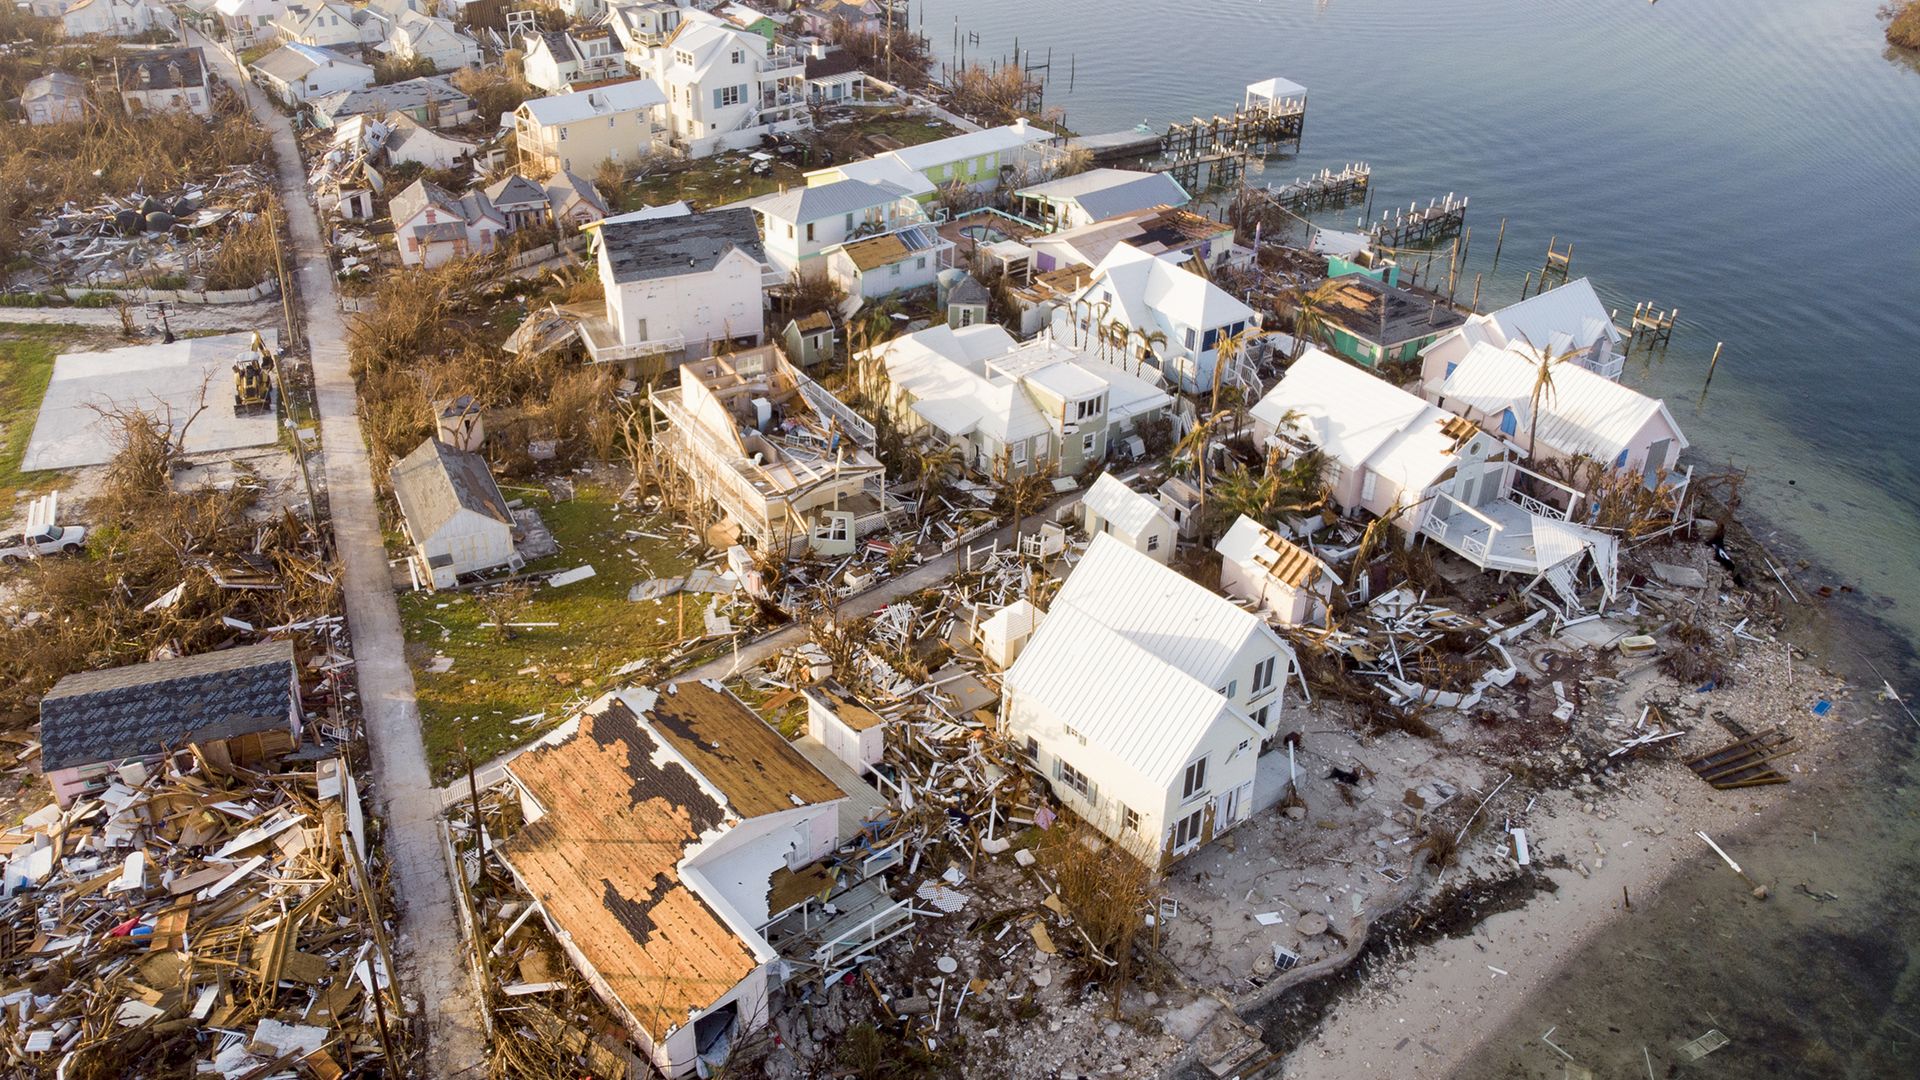 Homes wrecked in Hurricane Dorian's aftermath in the Bahamas